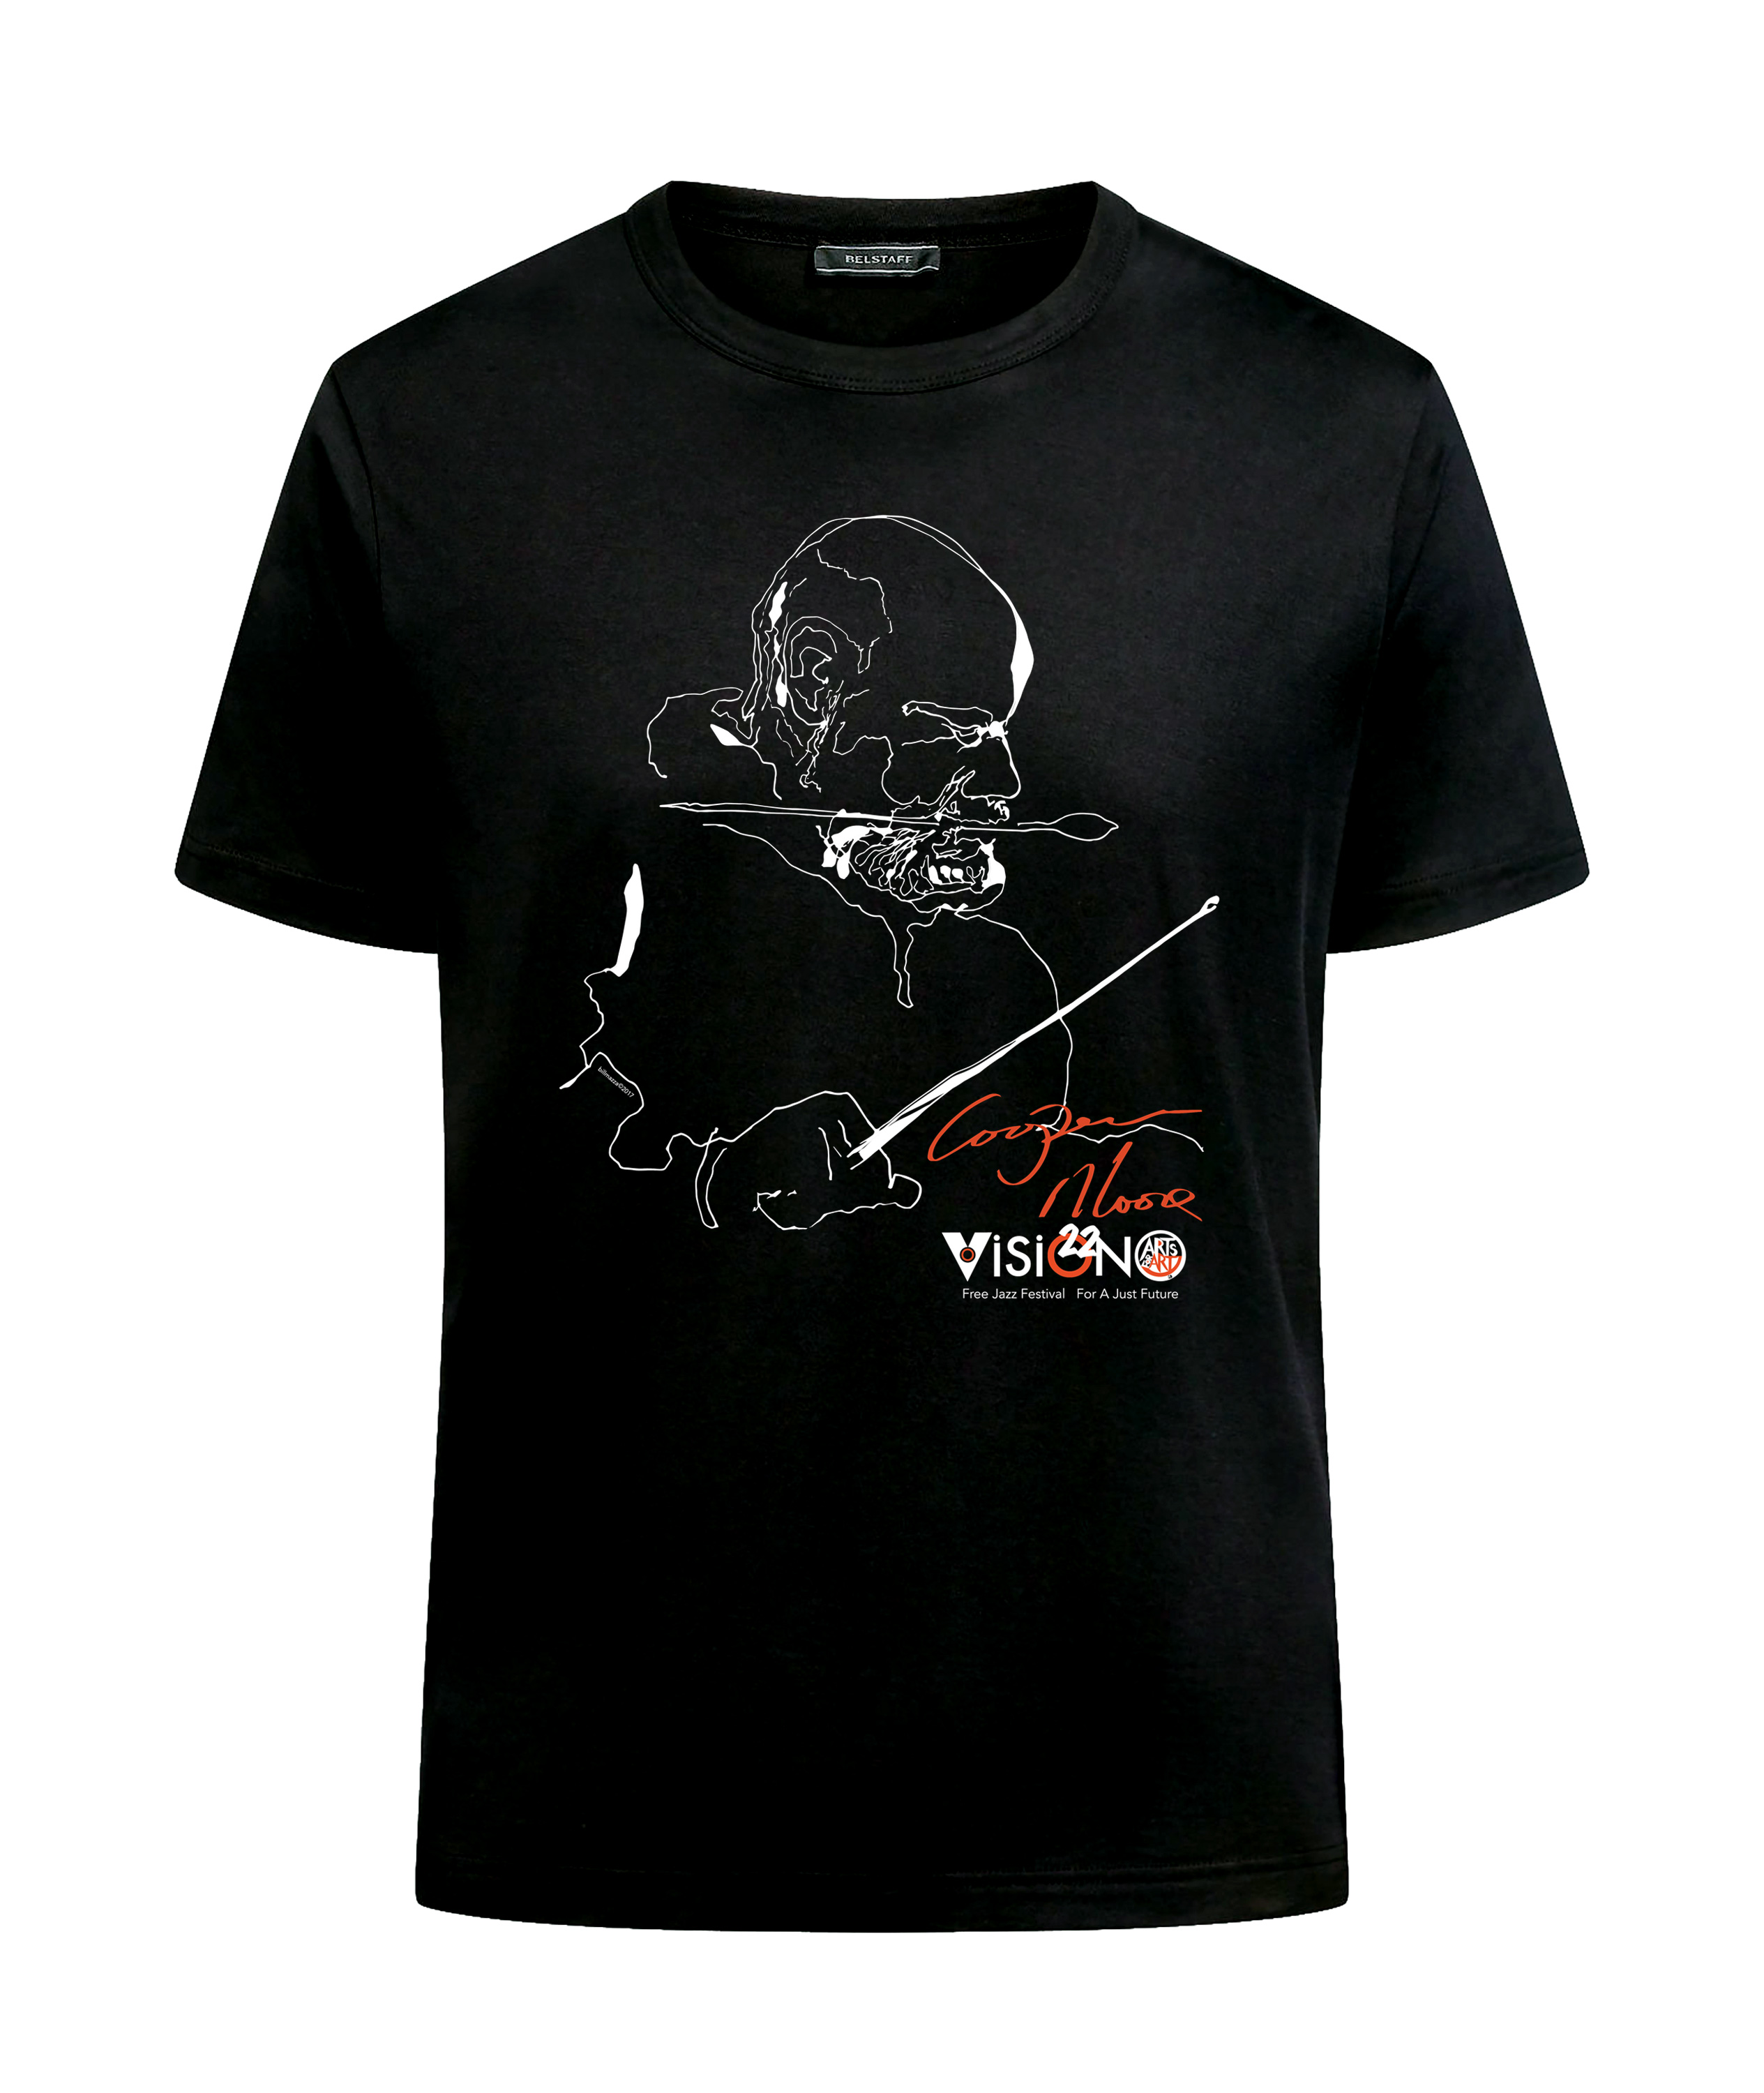 black tshirt with a drawn portrait of mulit-instrumentalist Cooper-Moore